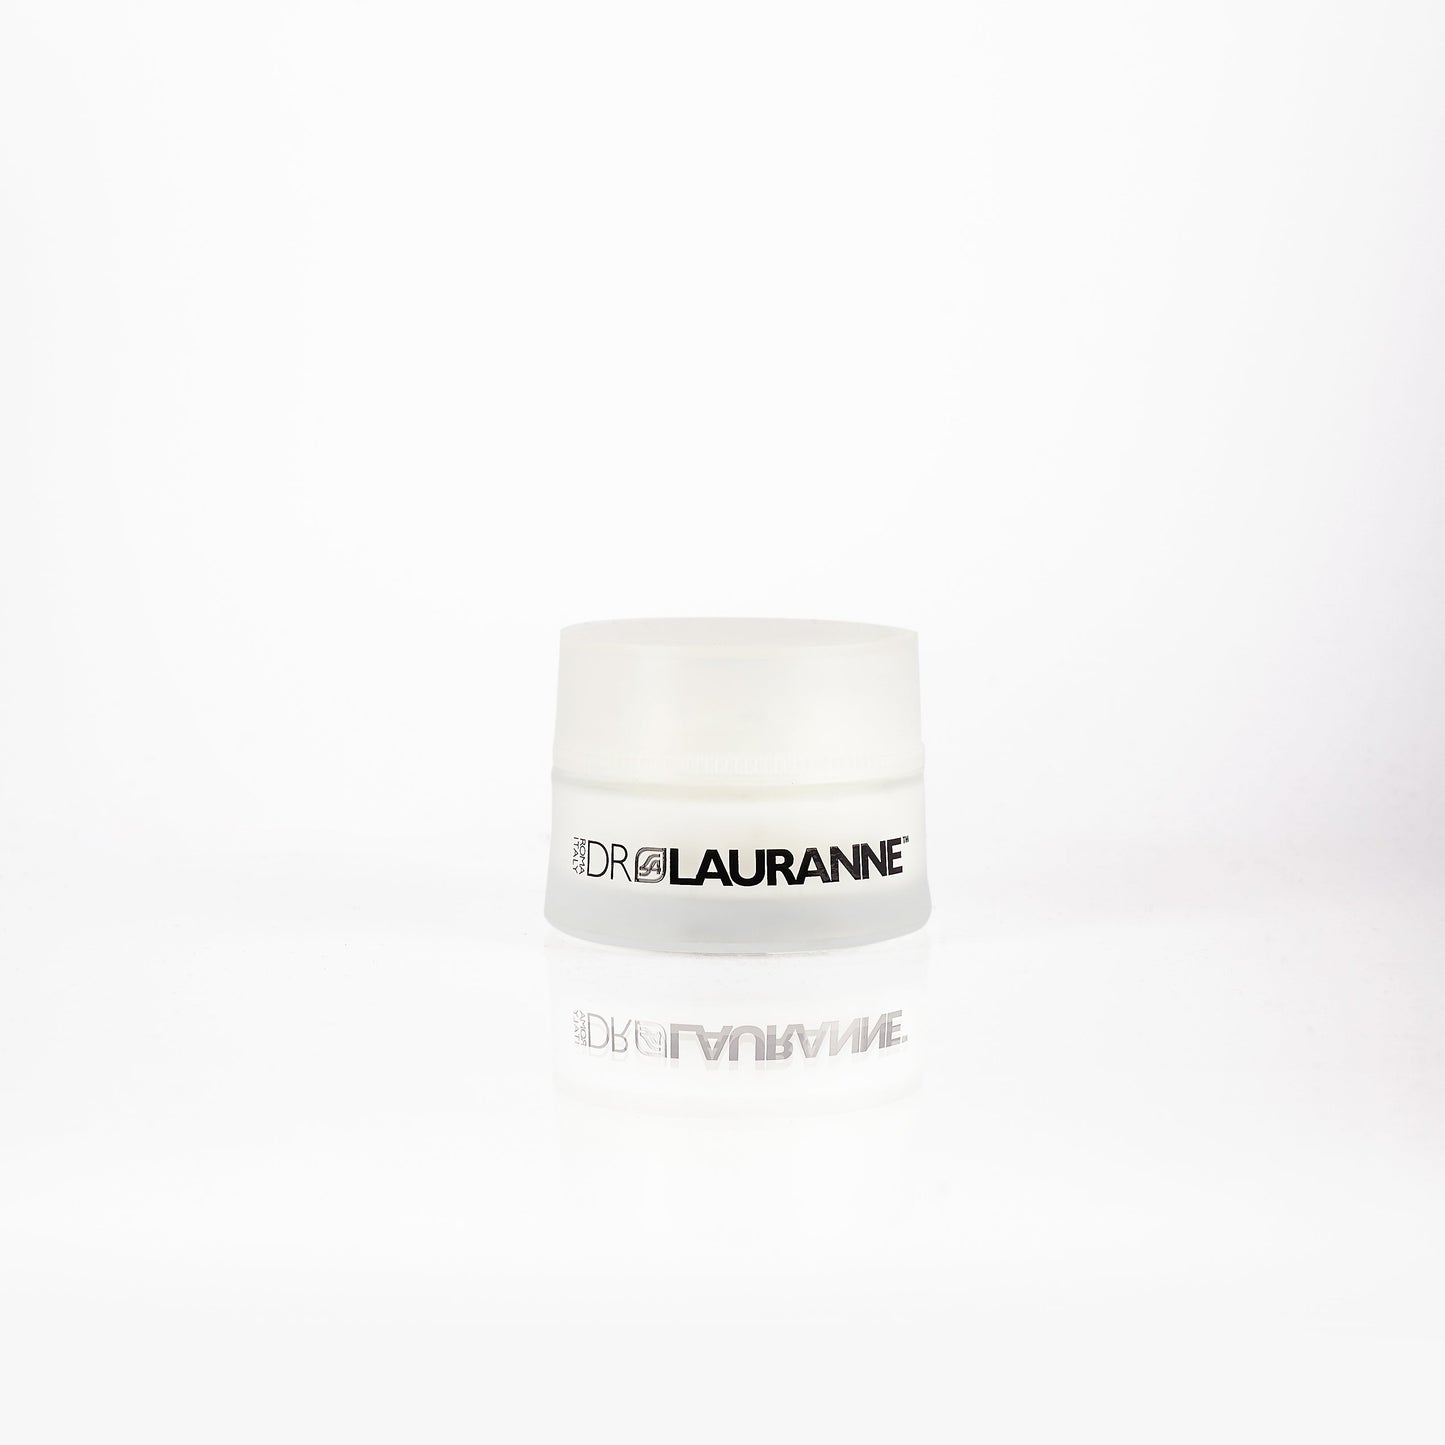 Night Cream that evens out the skin tone, with pink hibiscus and fruit acids